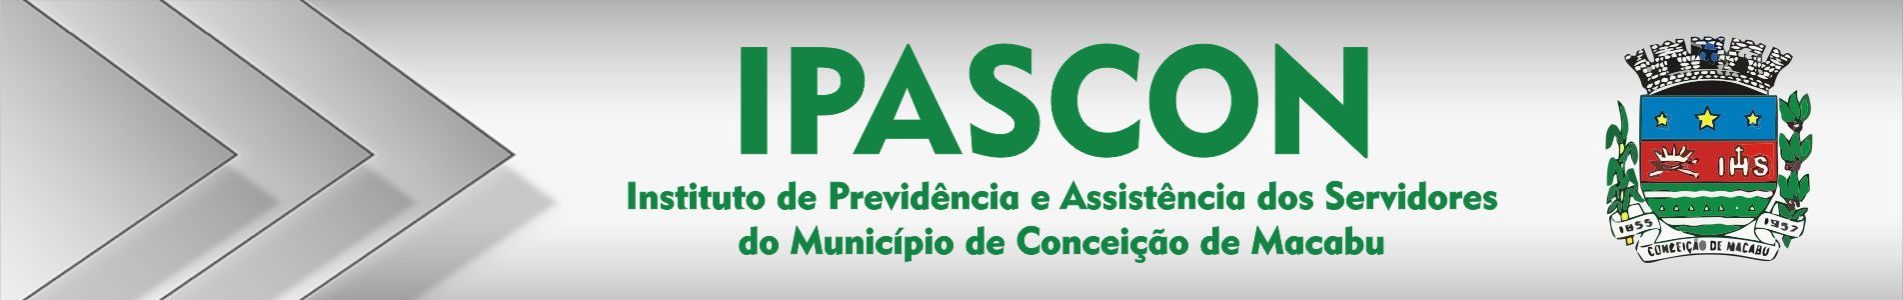 cropped-IPASCON.jpg